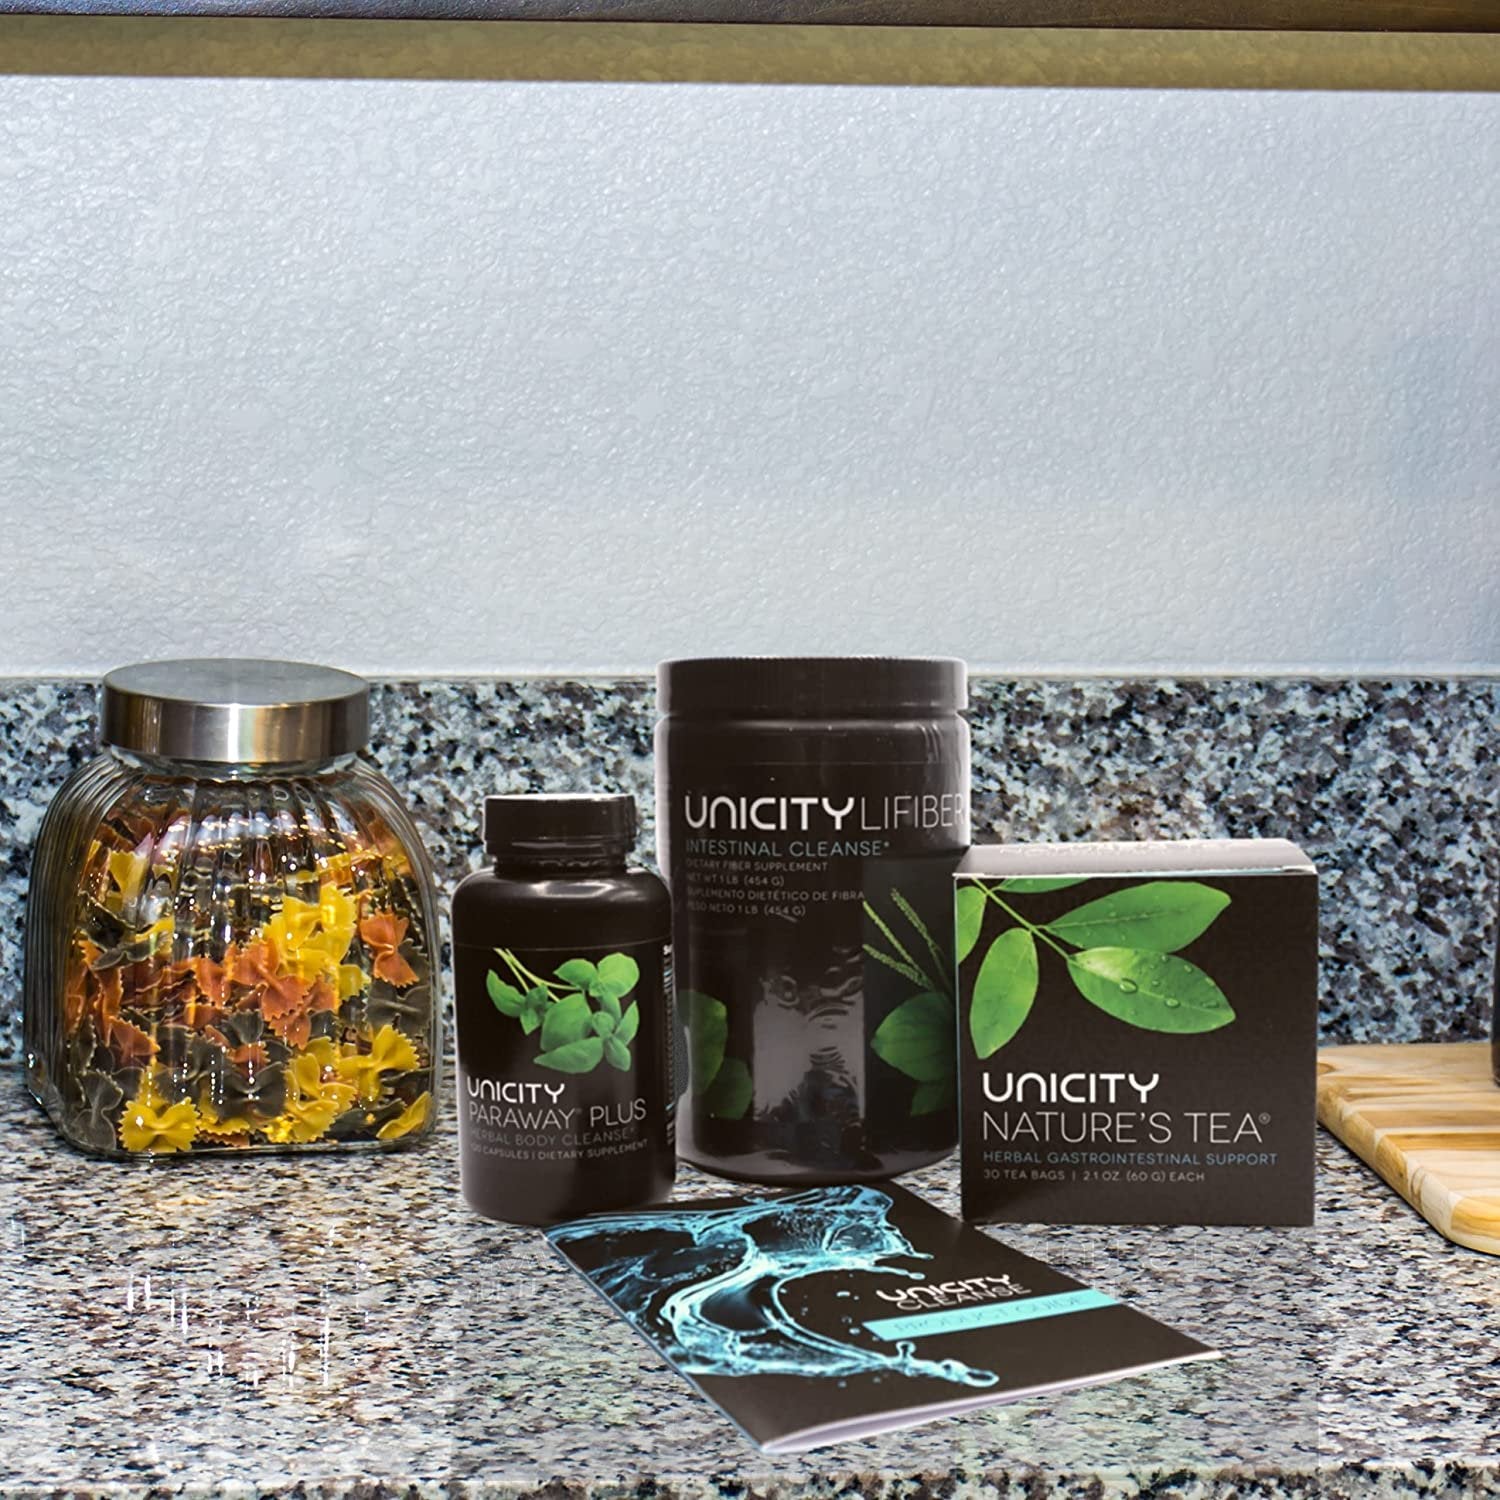 Unicity Cleanse with Nature's Tea Natural Dietary System - Healthy Detox Cleanse Kit of Unicity LiFiber Intestinal Cleanse, Paraway Plus Body Cleanse, and Nature's Tea Gastrointestinal Support